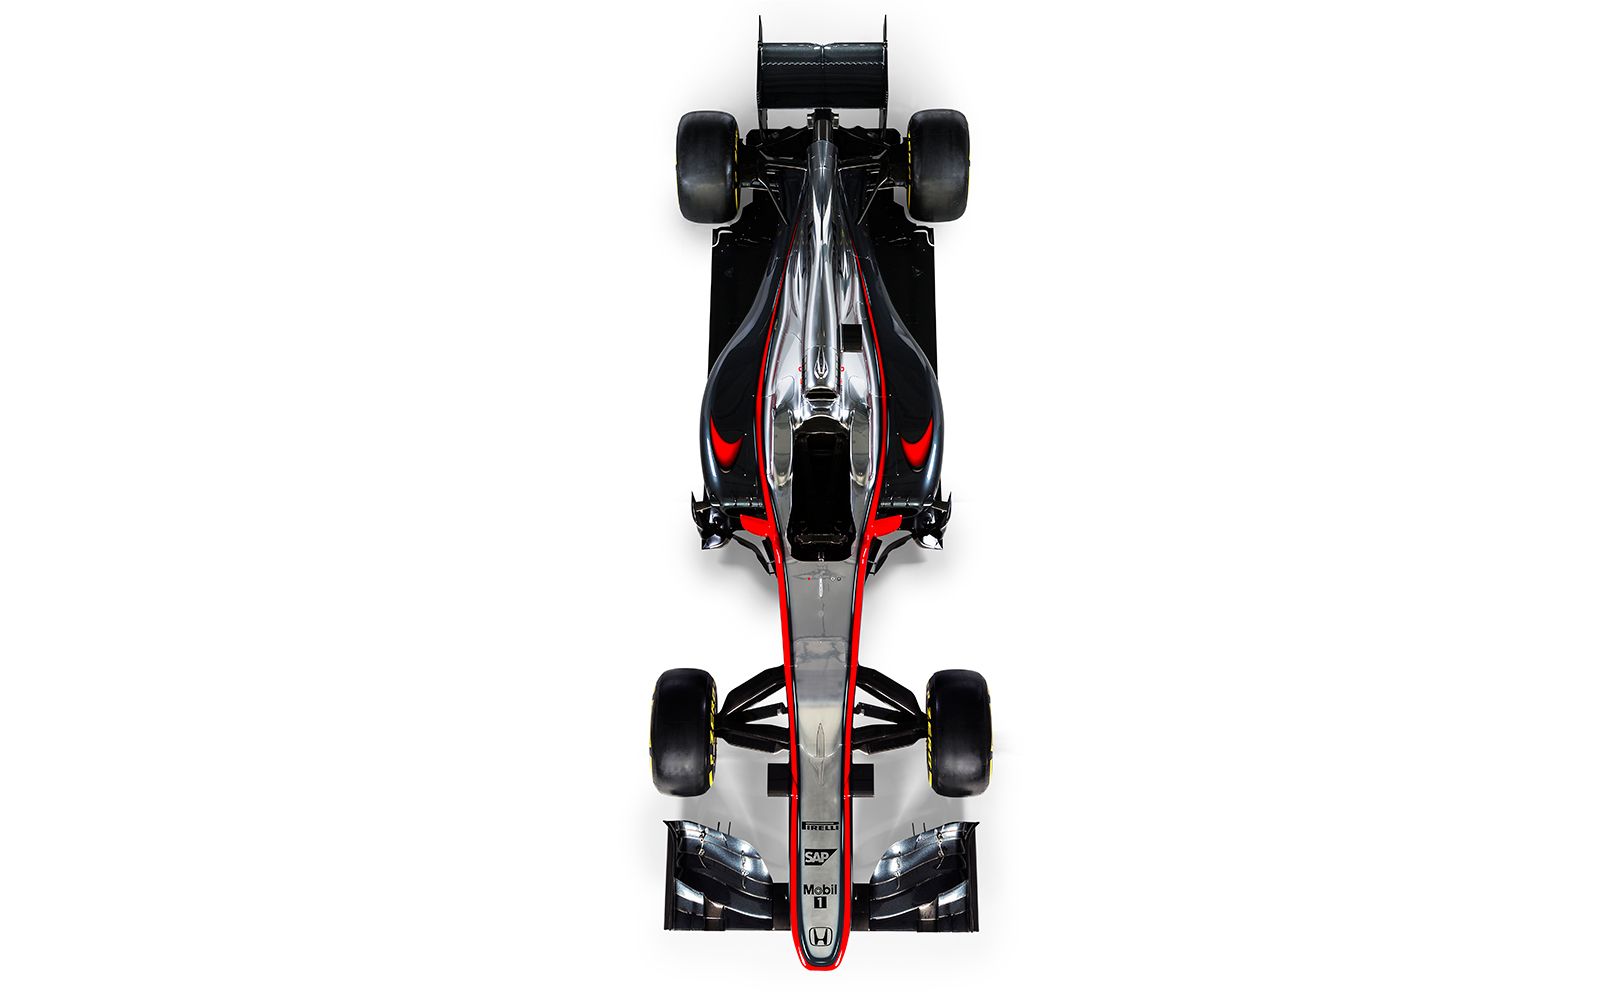 formula 1 2015 what’s new cars rules and changes explained image 3